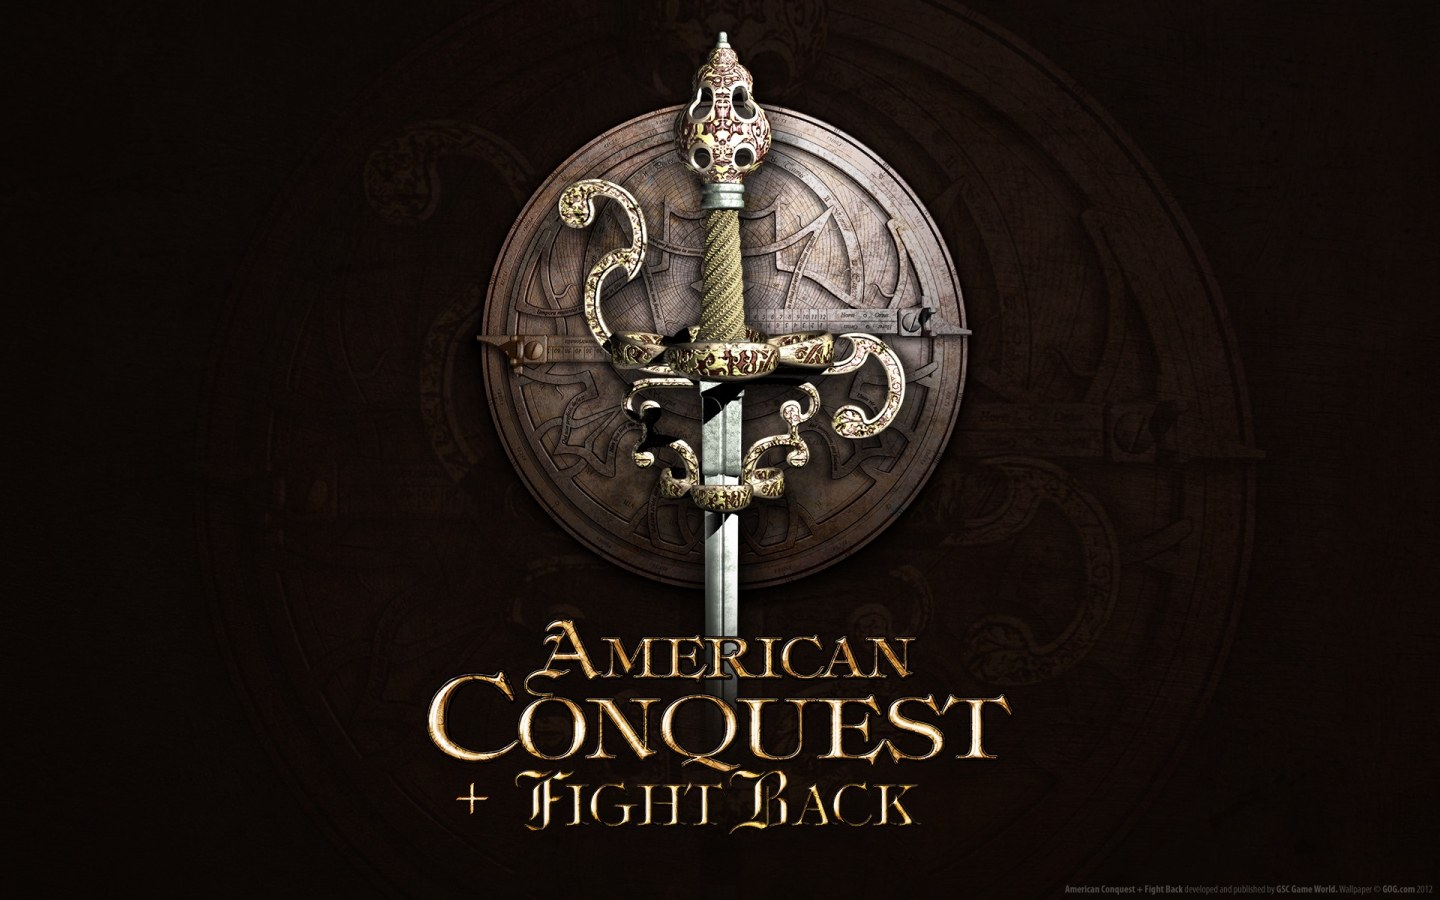 American Conquest for 1440 x 900 widescreen resolution